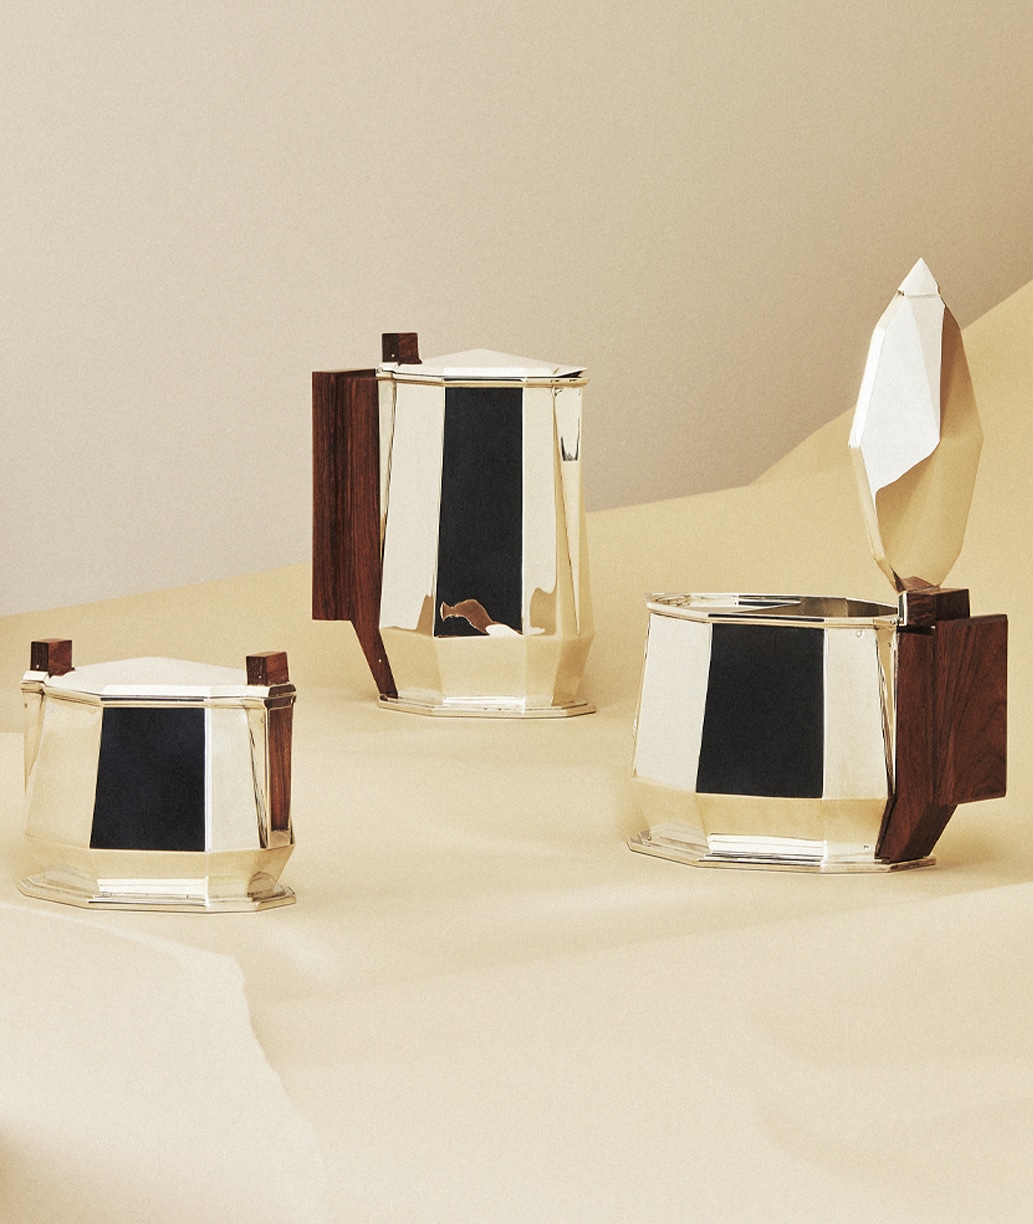 Anglet collection designed by Jean Puiforcat in sterling silver and precious wood